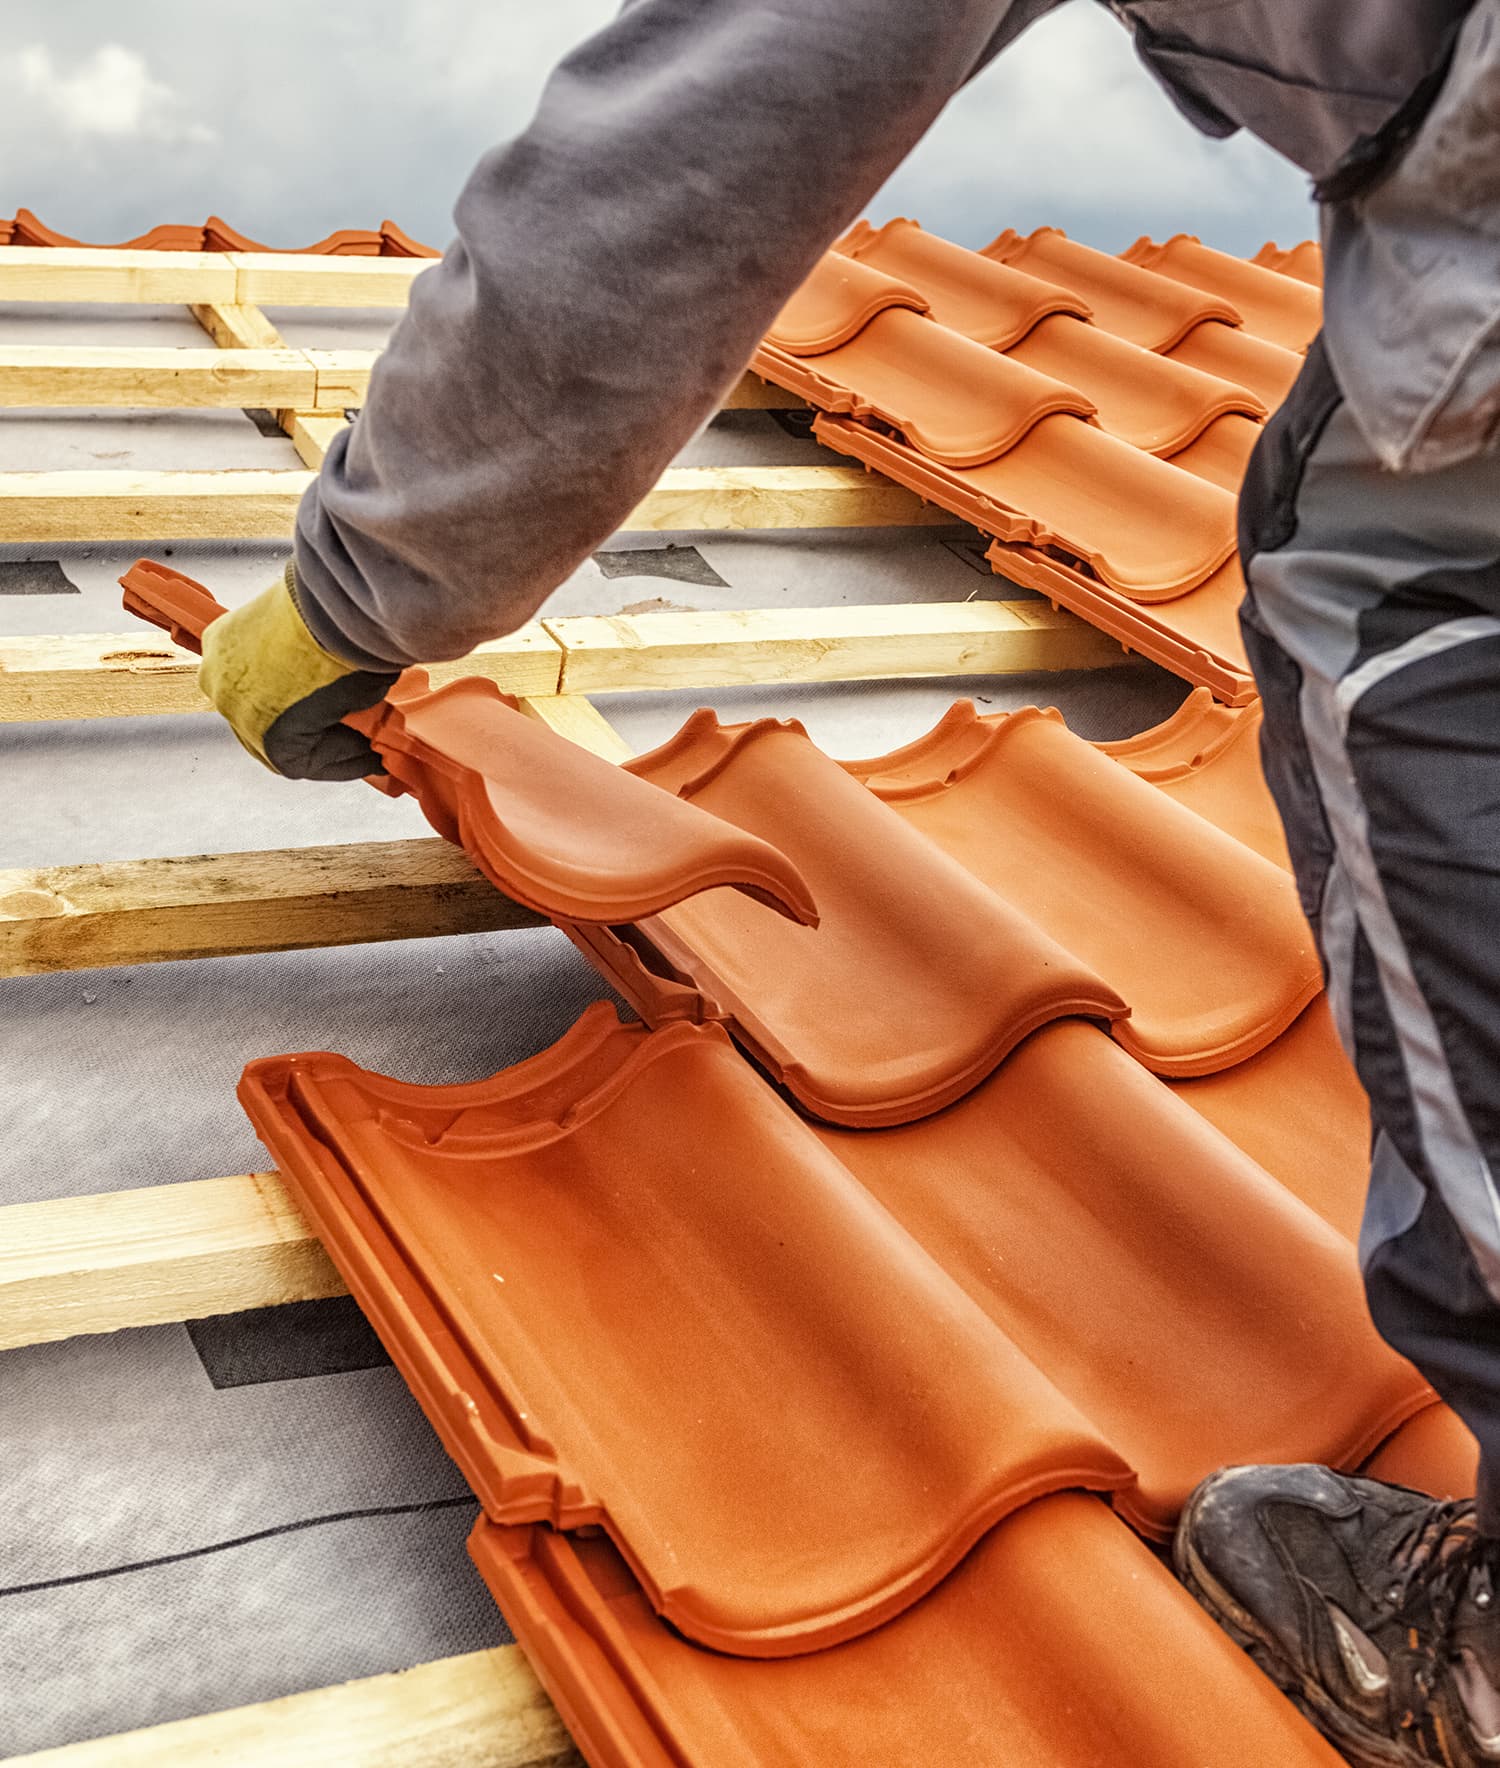 Roofer installing clay roof tiles